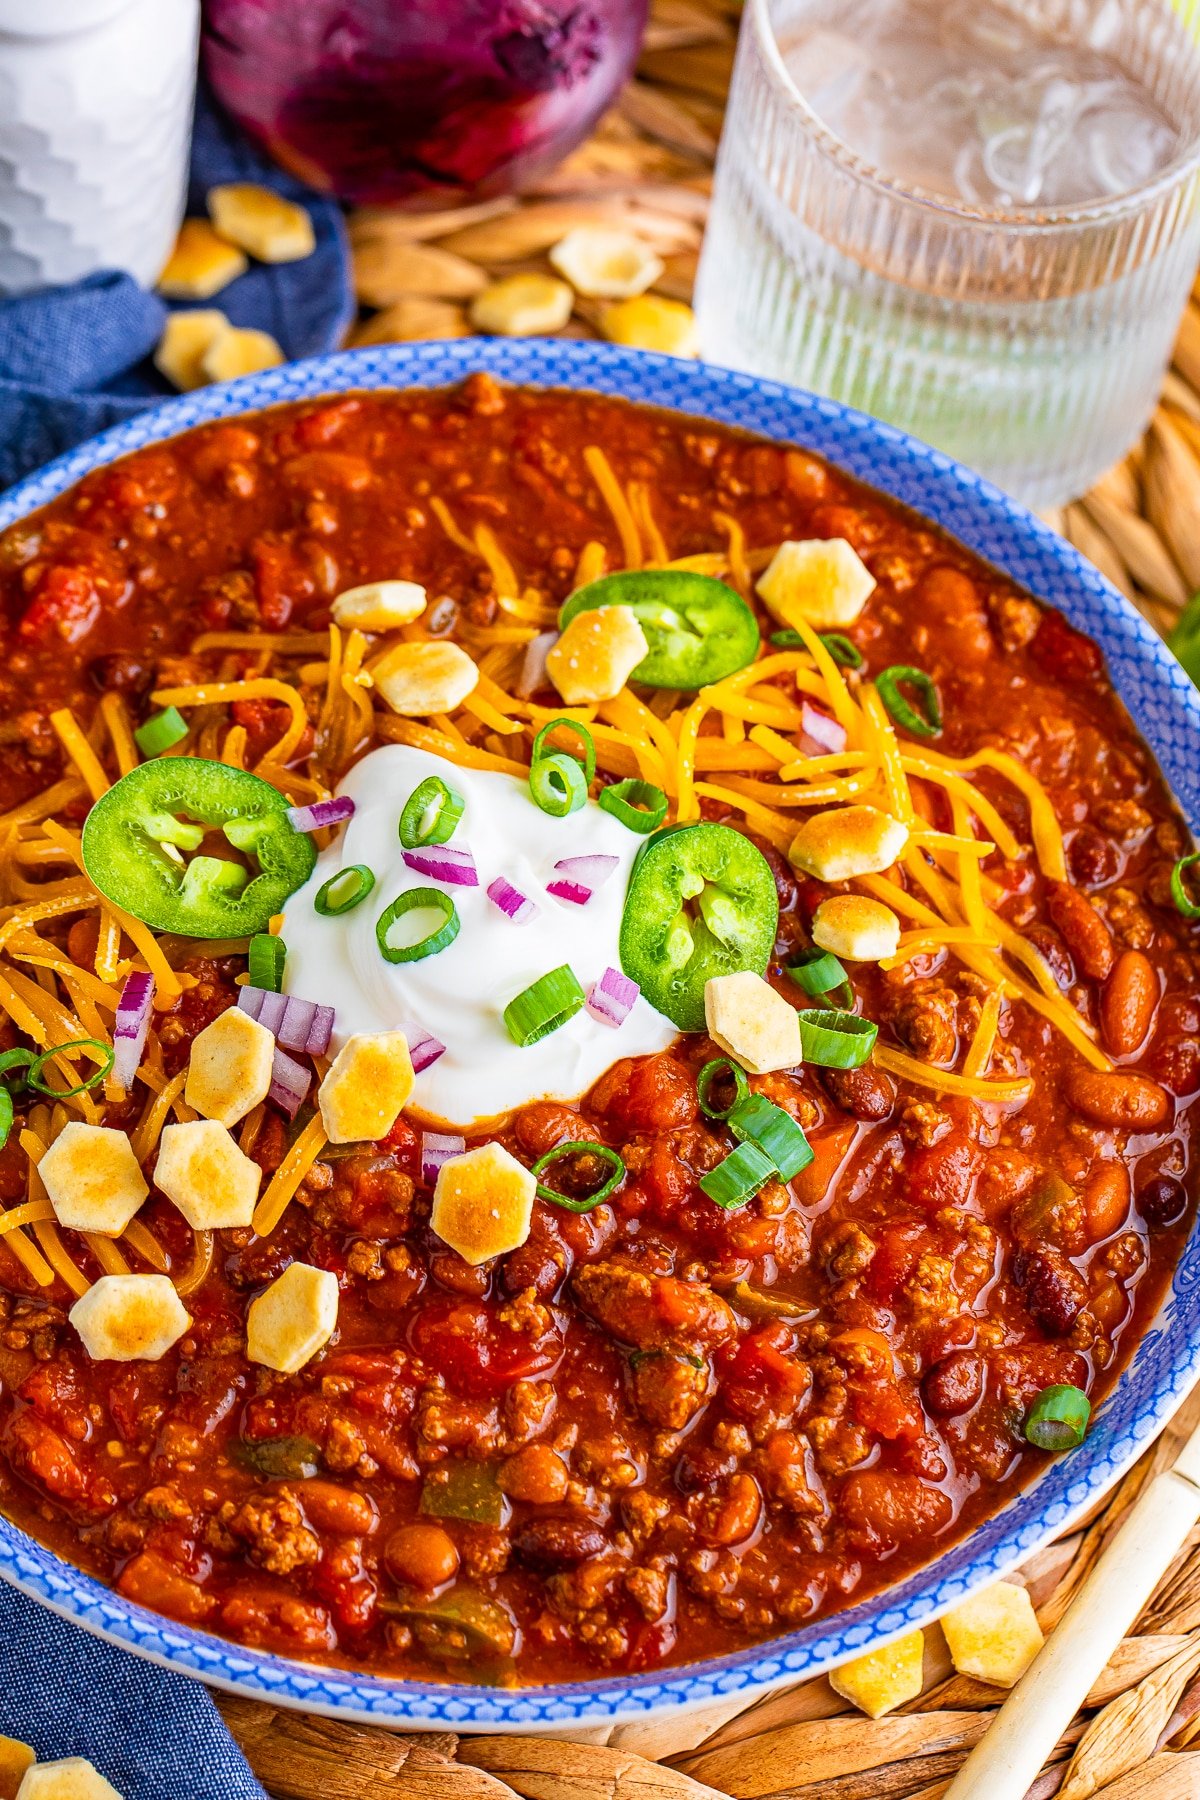 Award Winning Chili Recipe served in a blue bowl with toppings